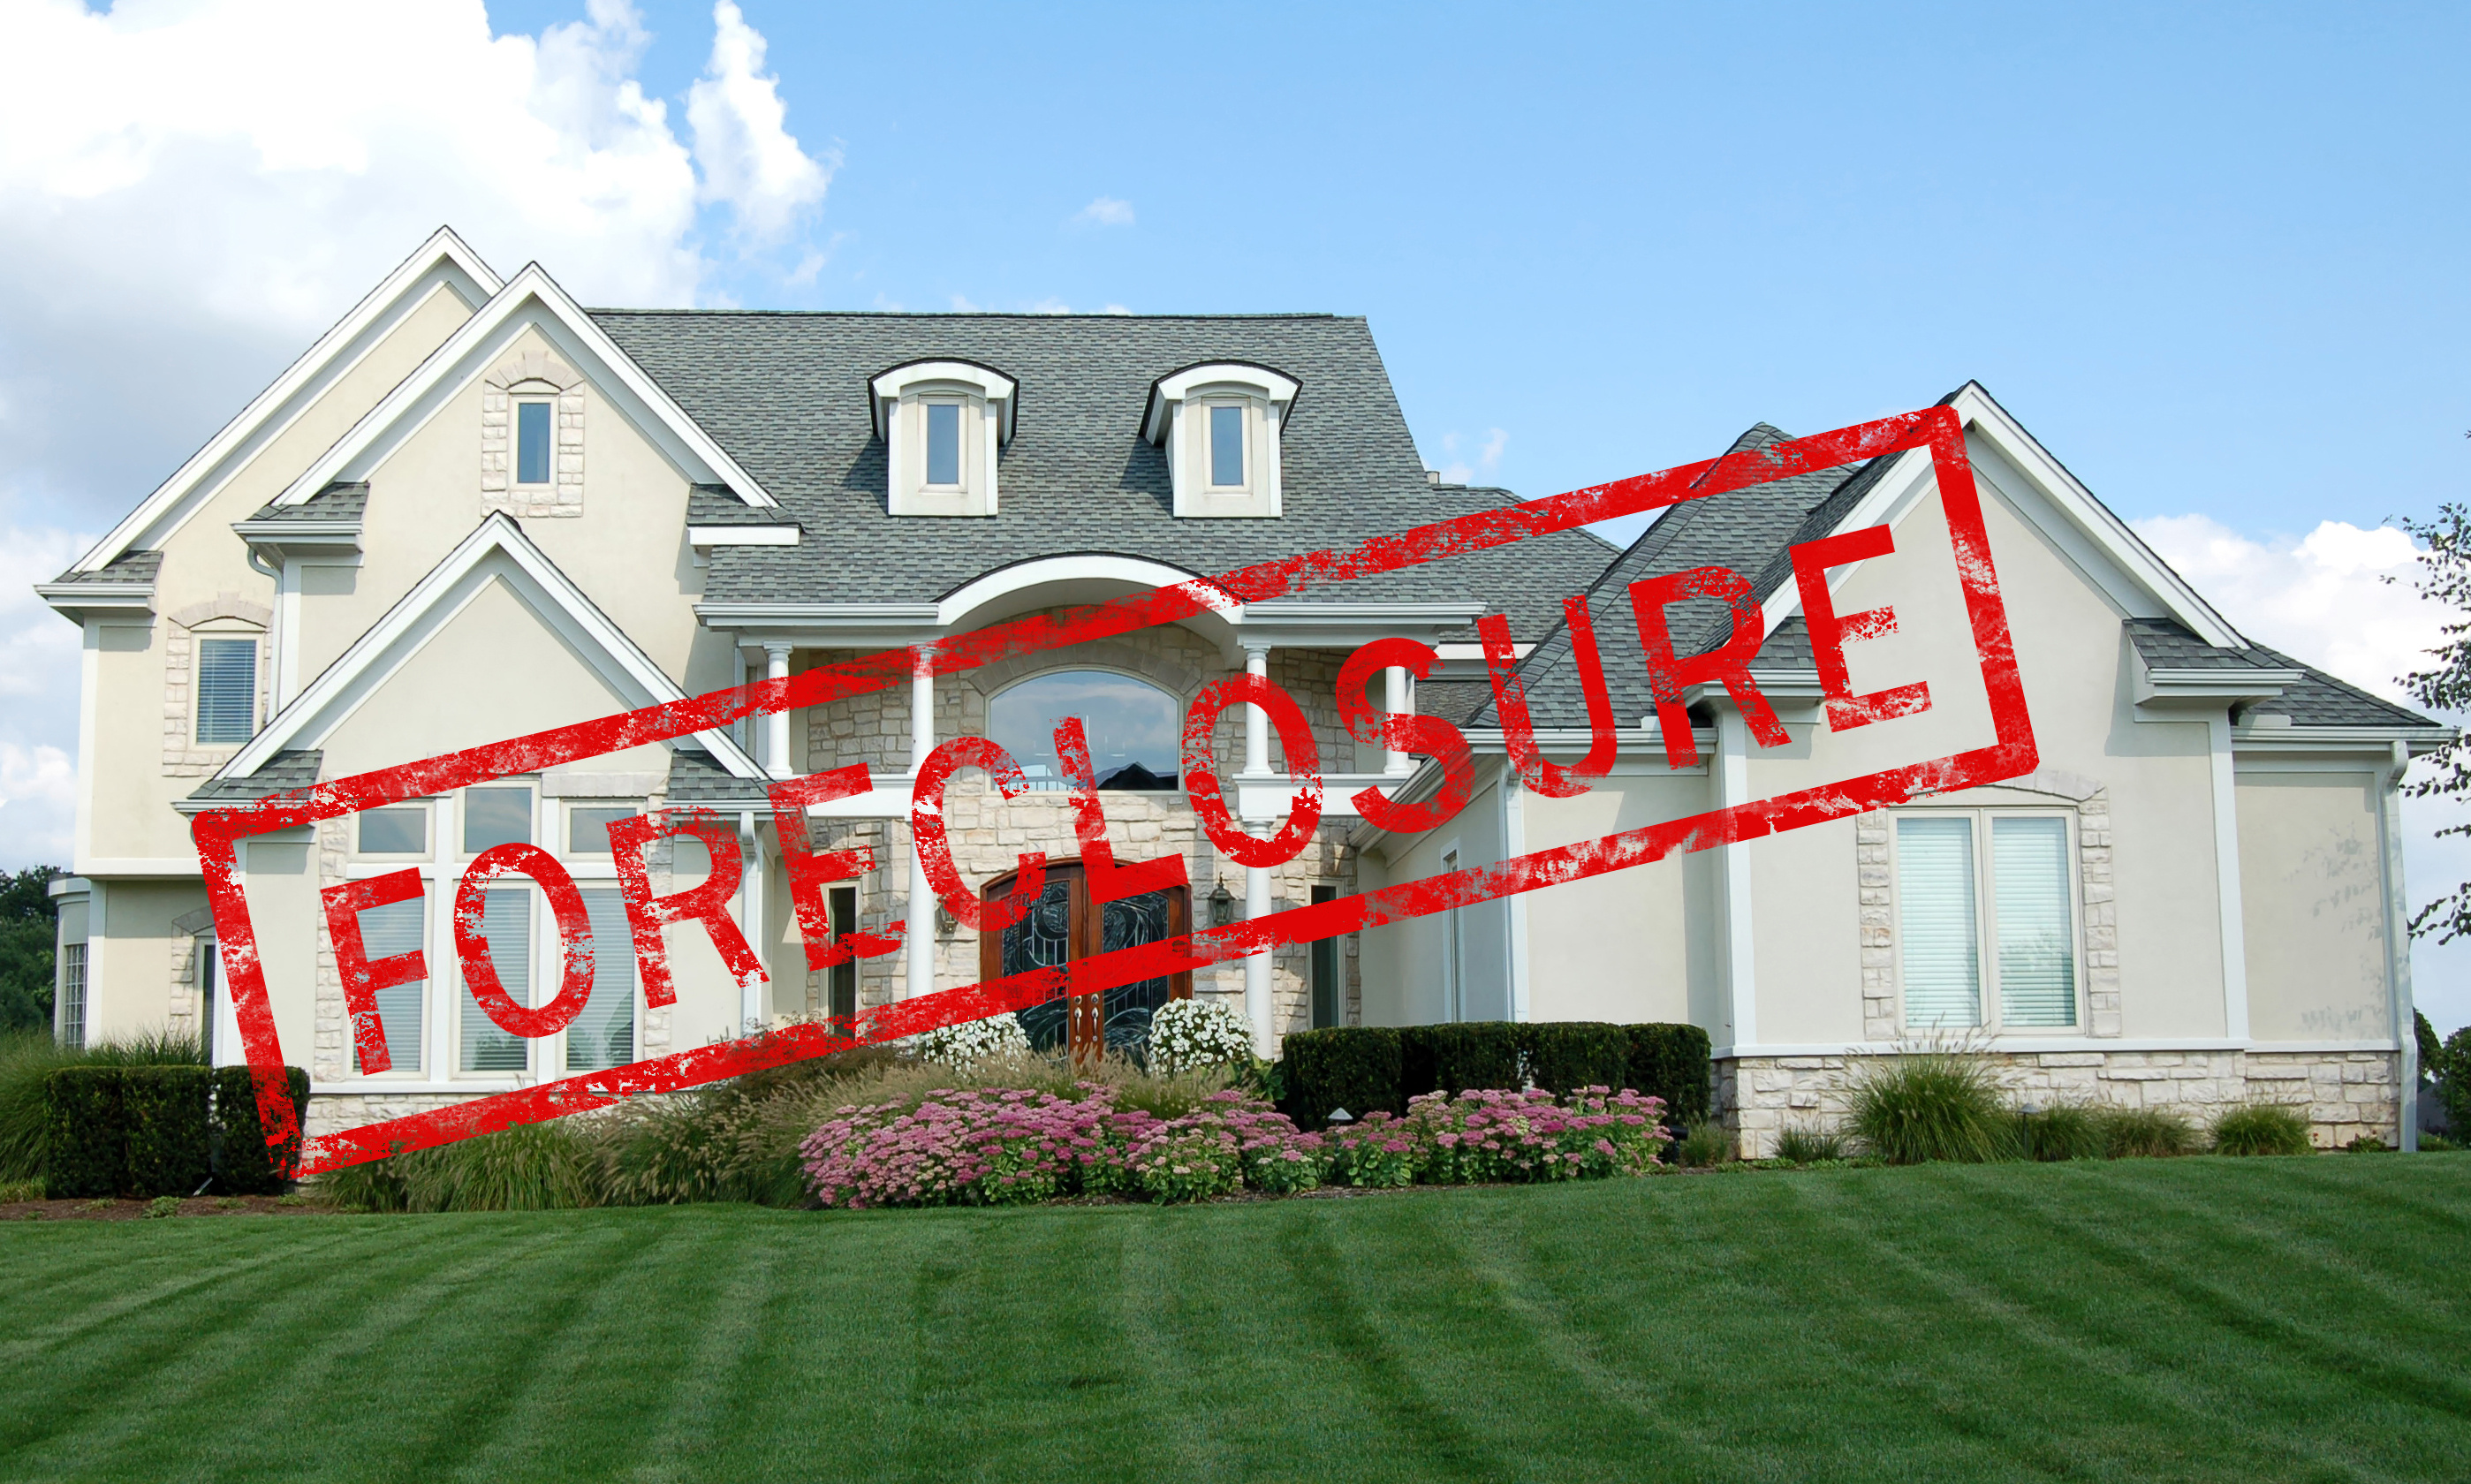 Call Atlantic Coast Appraisal Inc. when you need valuations of Broward foreclosures